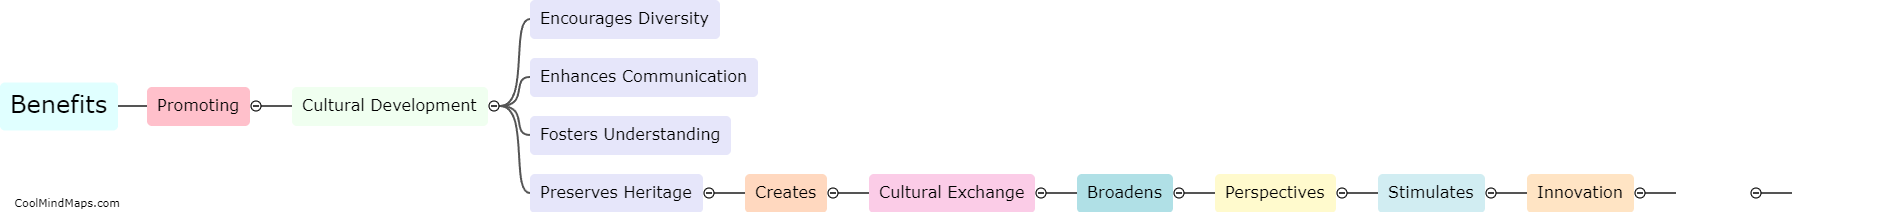 What are the benefits of promoting cultural development?